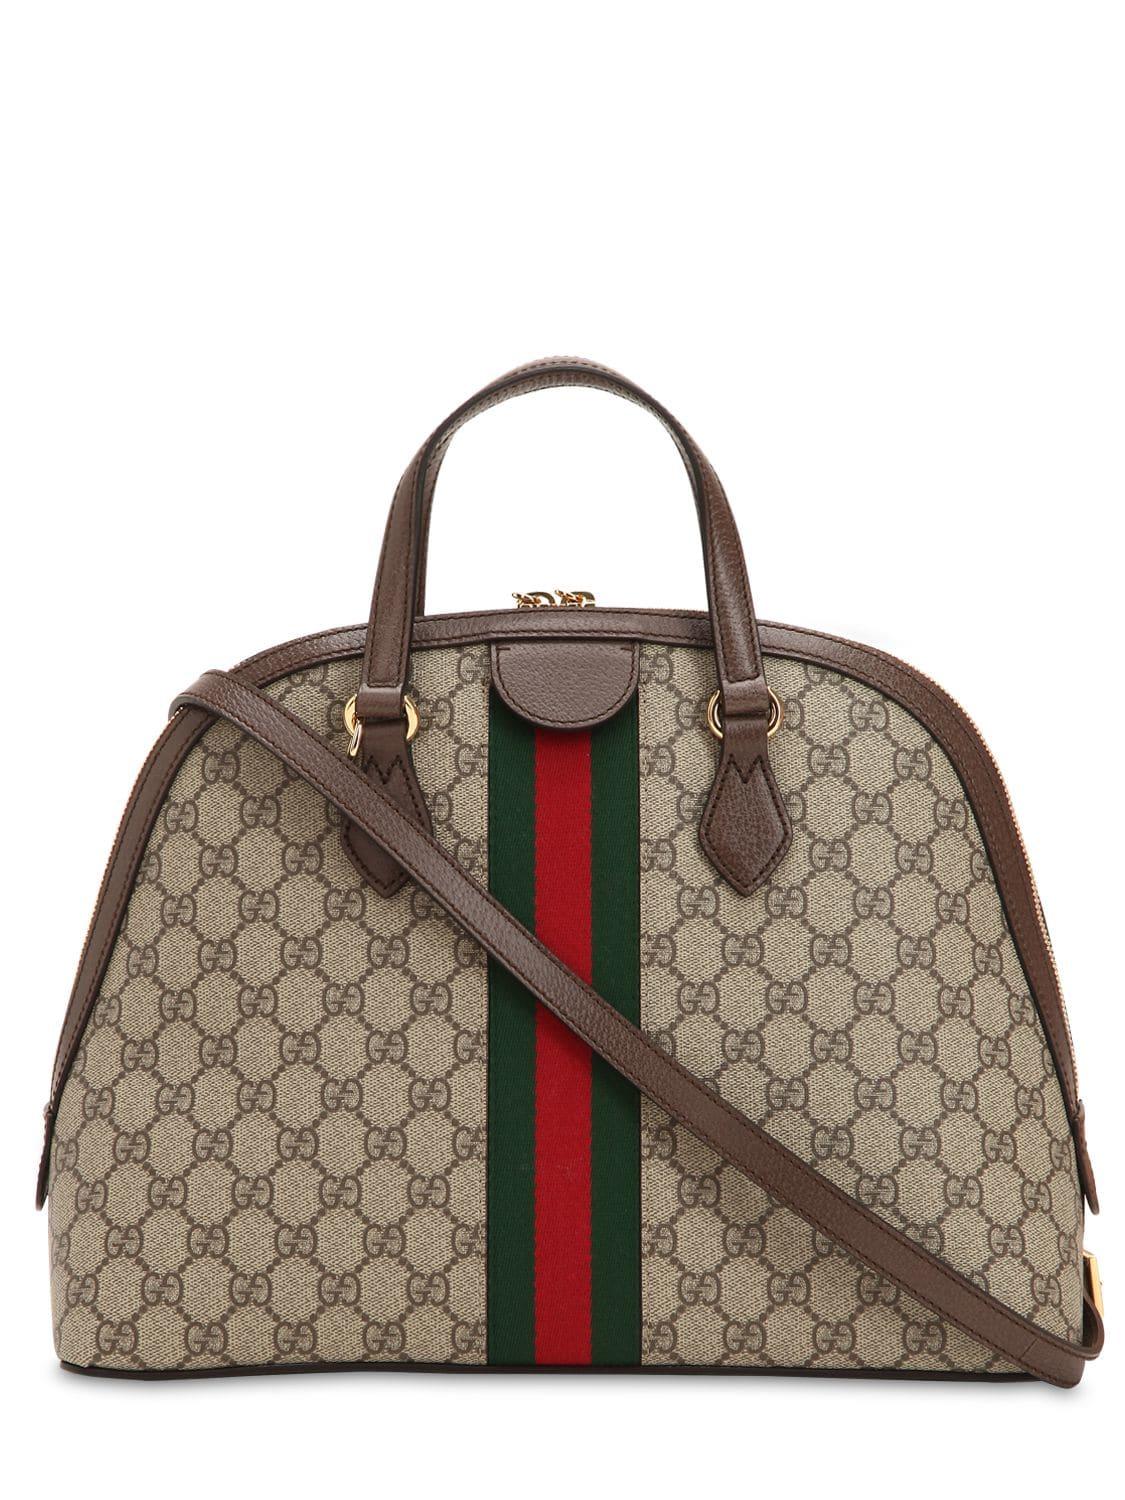 Gucci Ophidia GG Medium Top Handle Bag in Brown | Lyst Canada